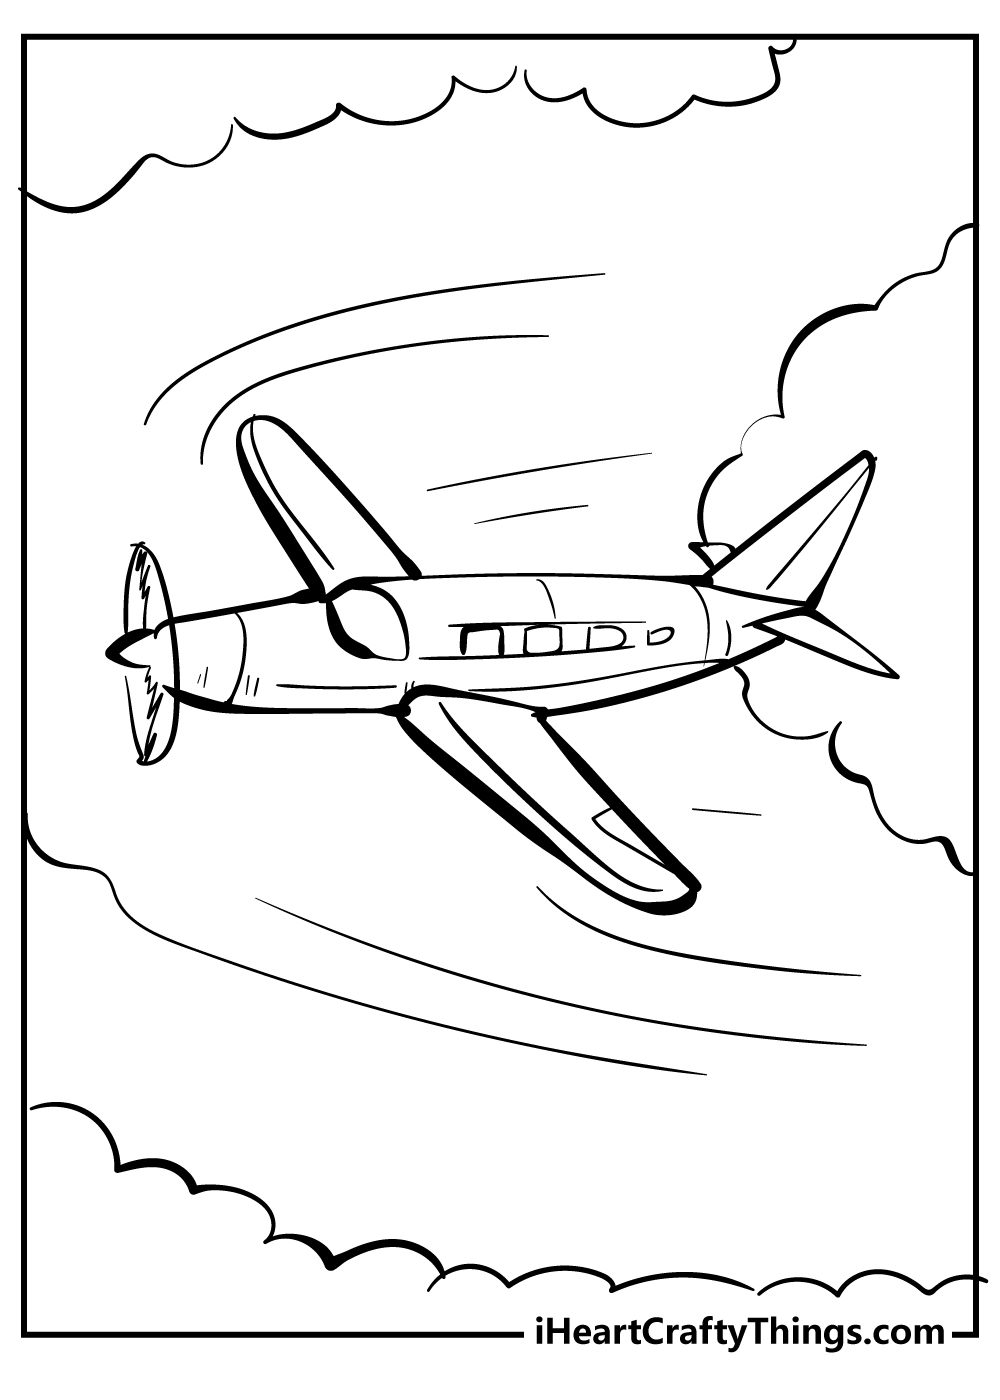 Airplane coloring pages free printable